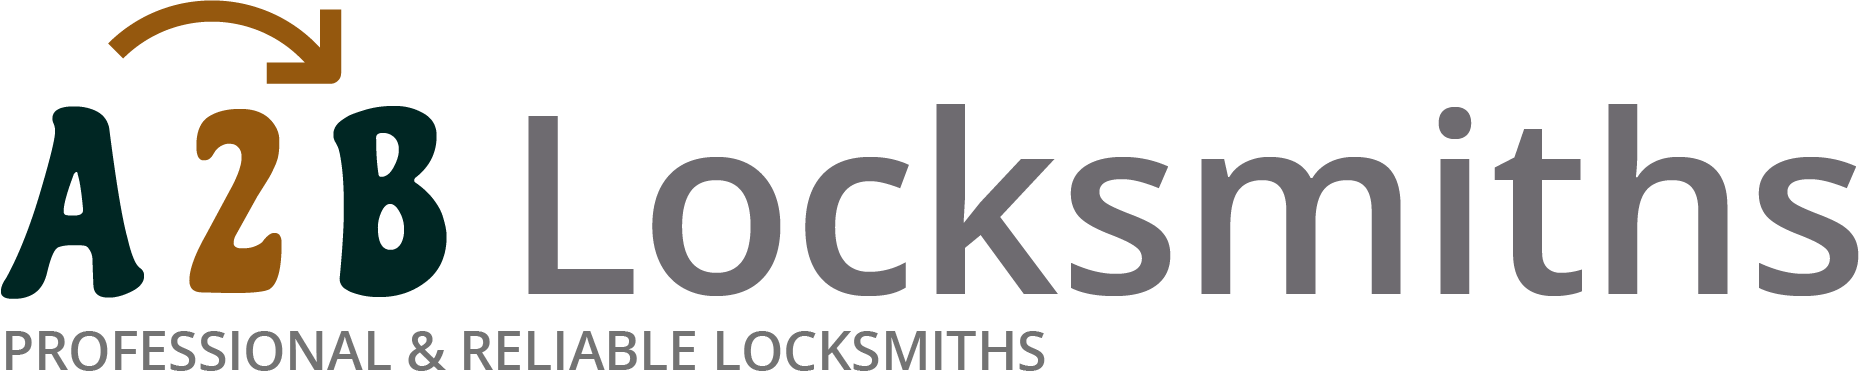 If you are locked out of house in Fulham, our 24/7 local emergency locksmith services can help you.